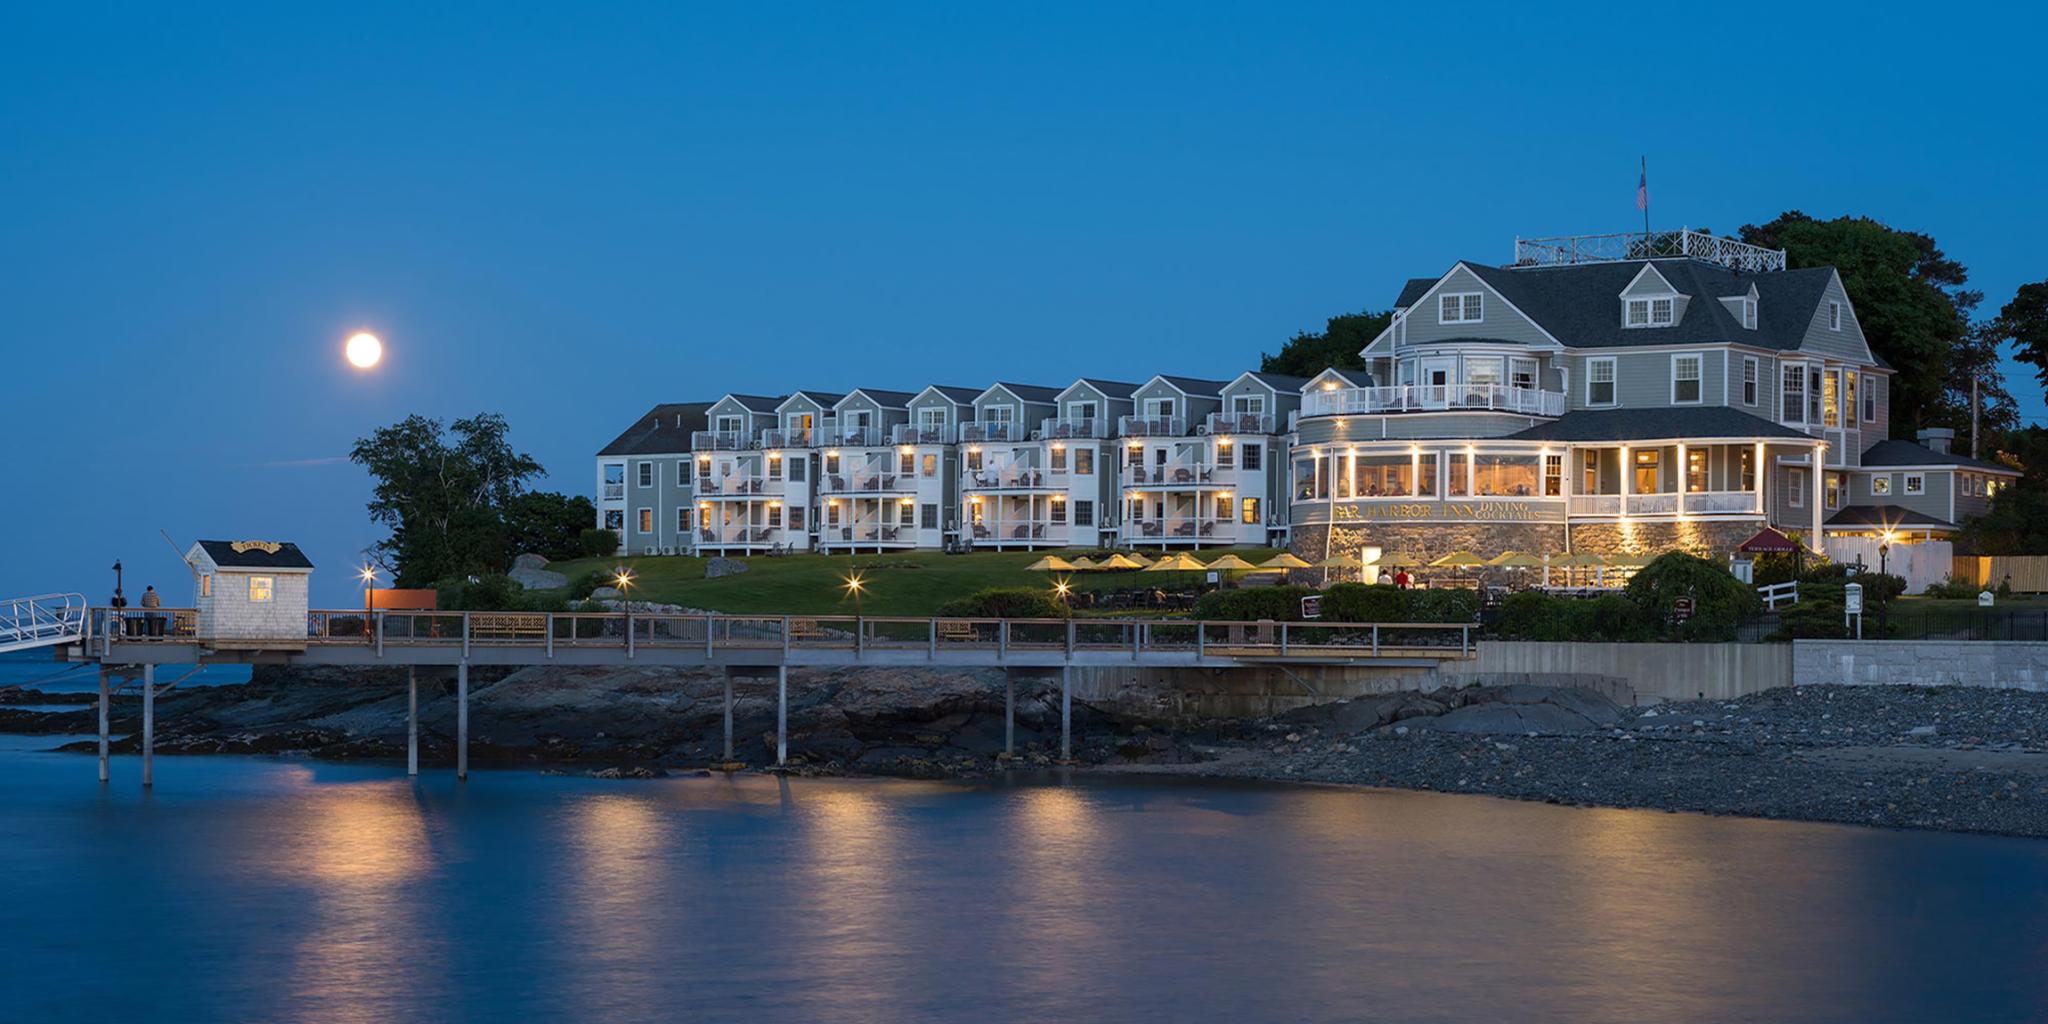 Unique Lodging Vacations In Maine New England Inns And Resorts